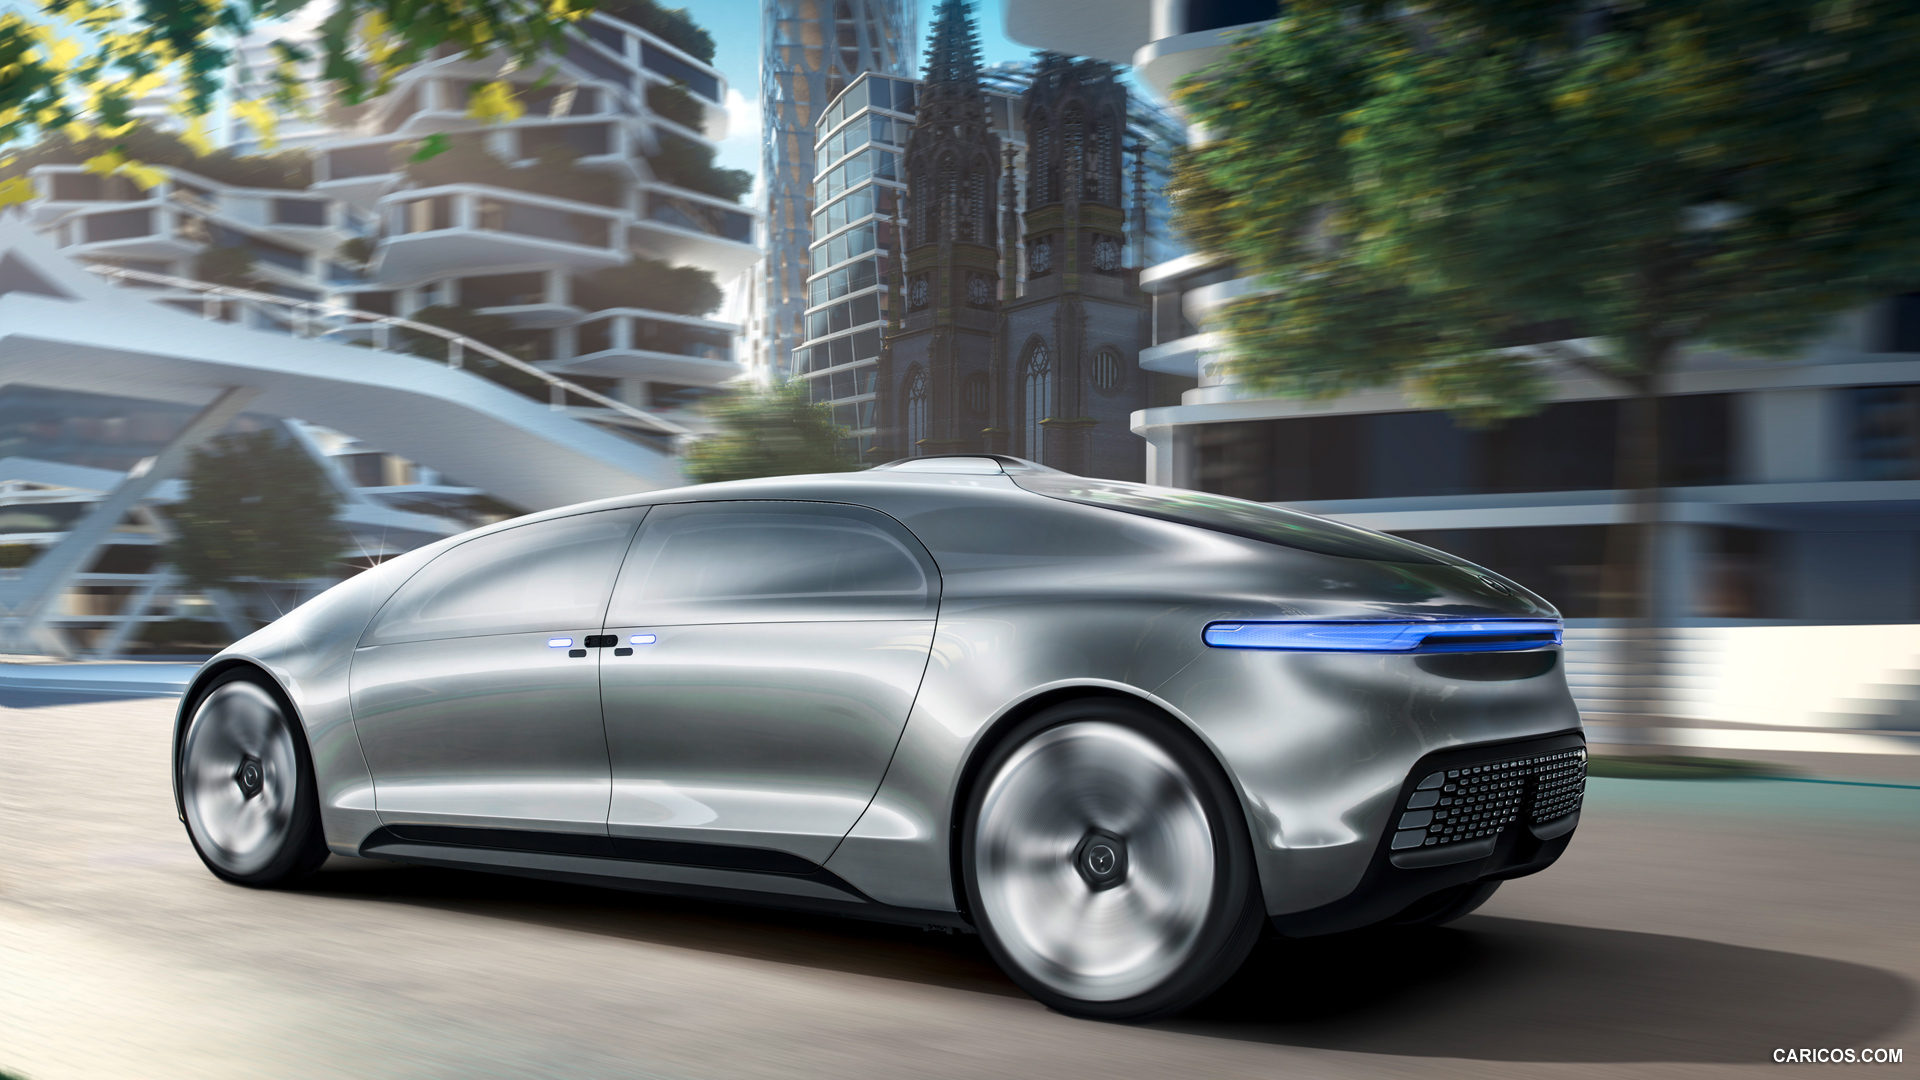 2015 Mercedes-Benz F 015 Luxury in Motion Concept  - Side, #4 of 92